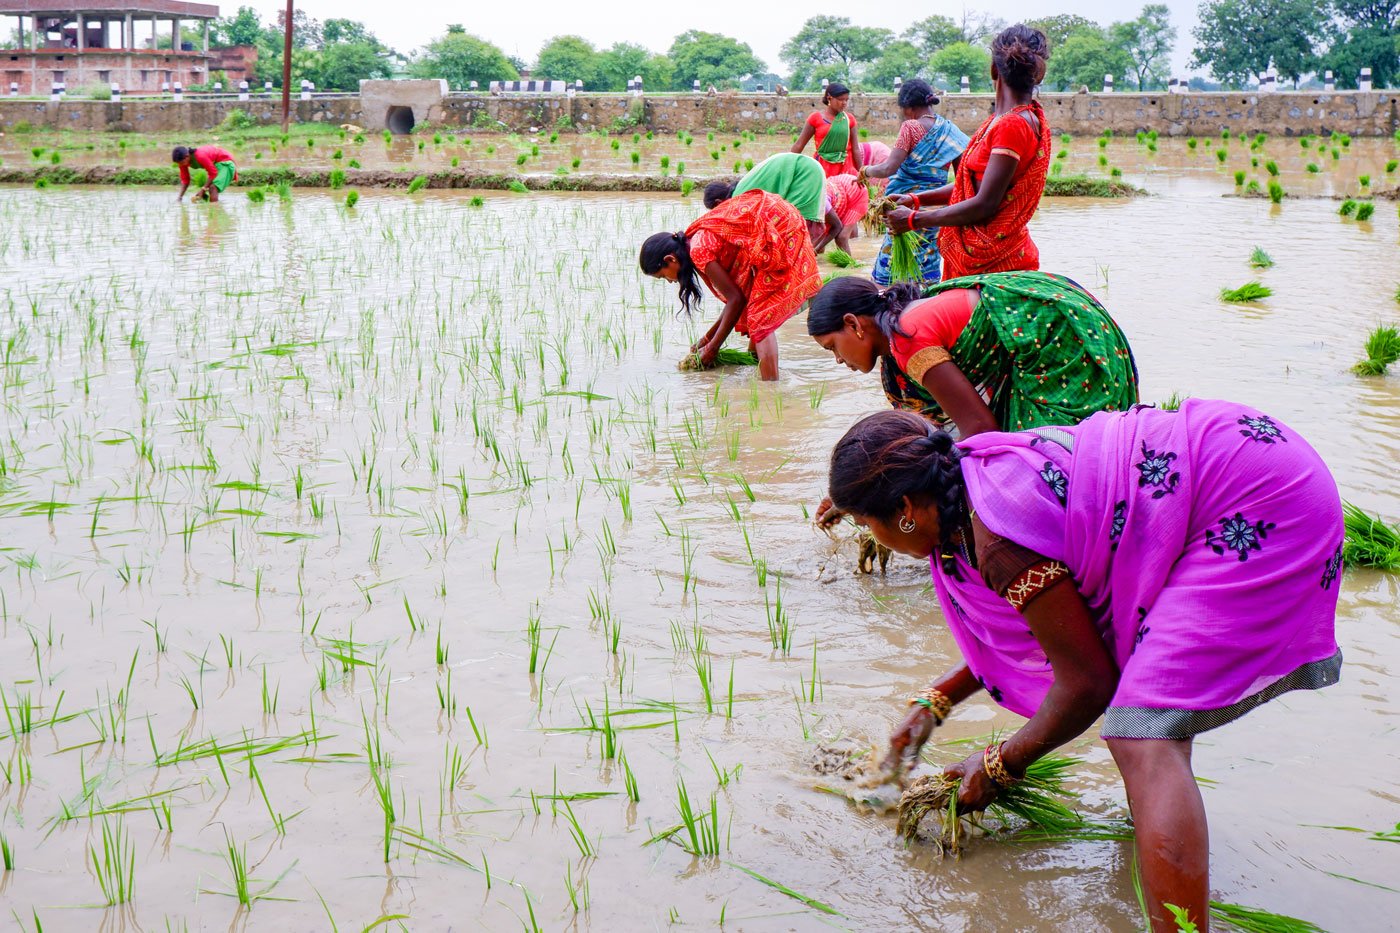 'We farm for nearly six months, but it does not give us any money in hand', says Anita Bhuiya (foreground, in purple)